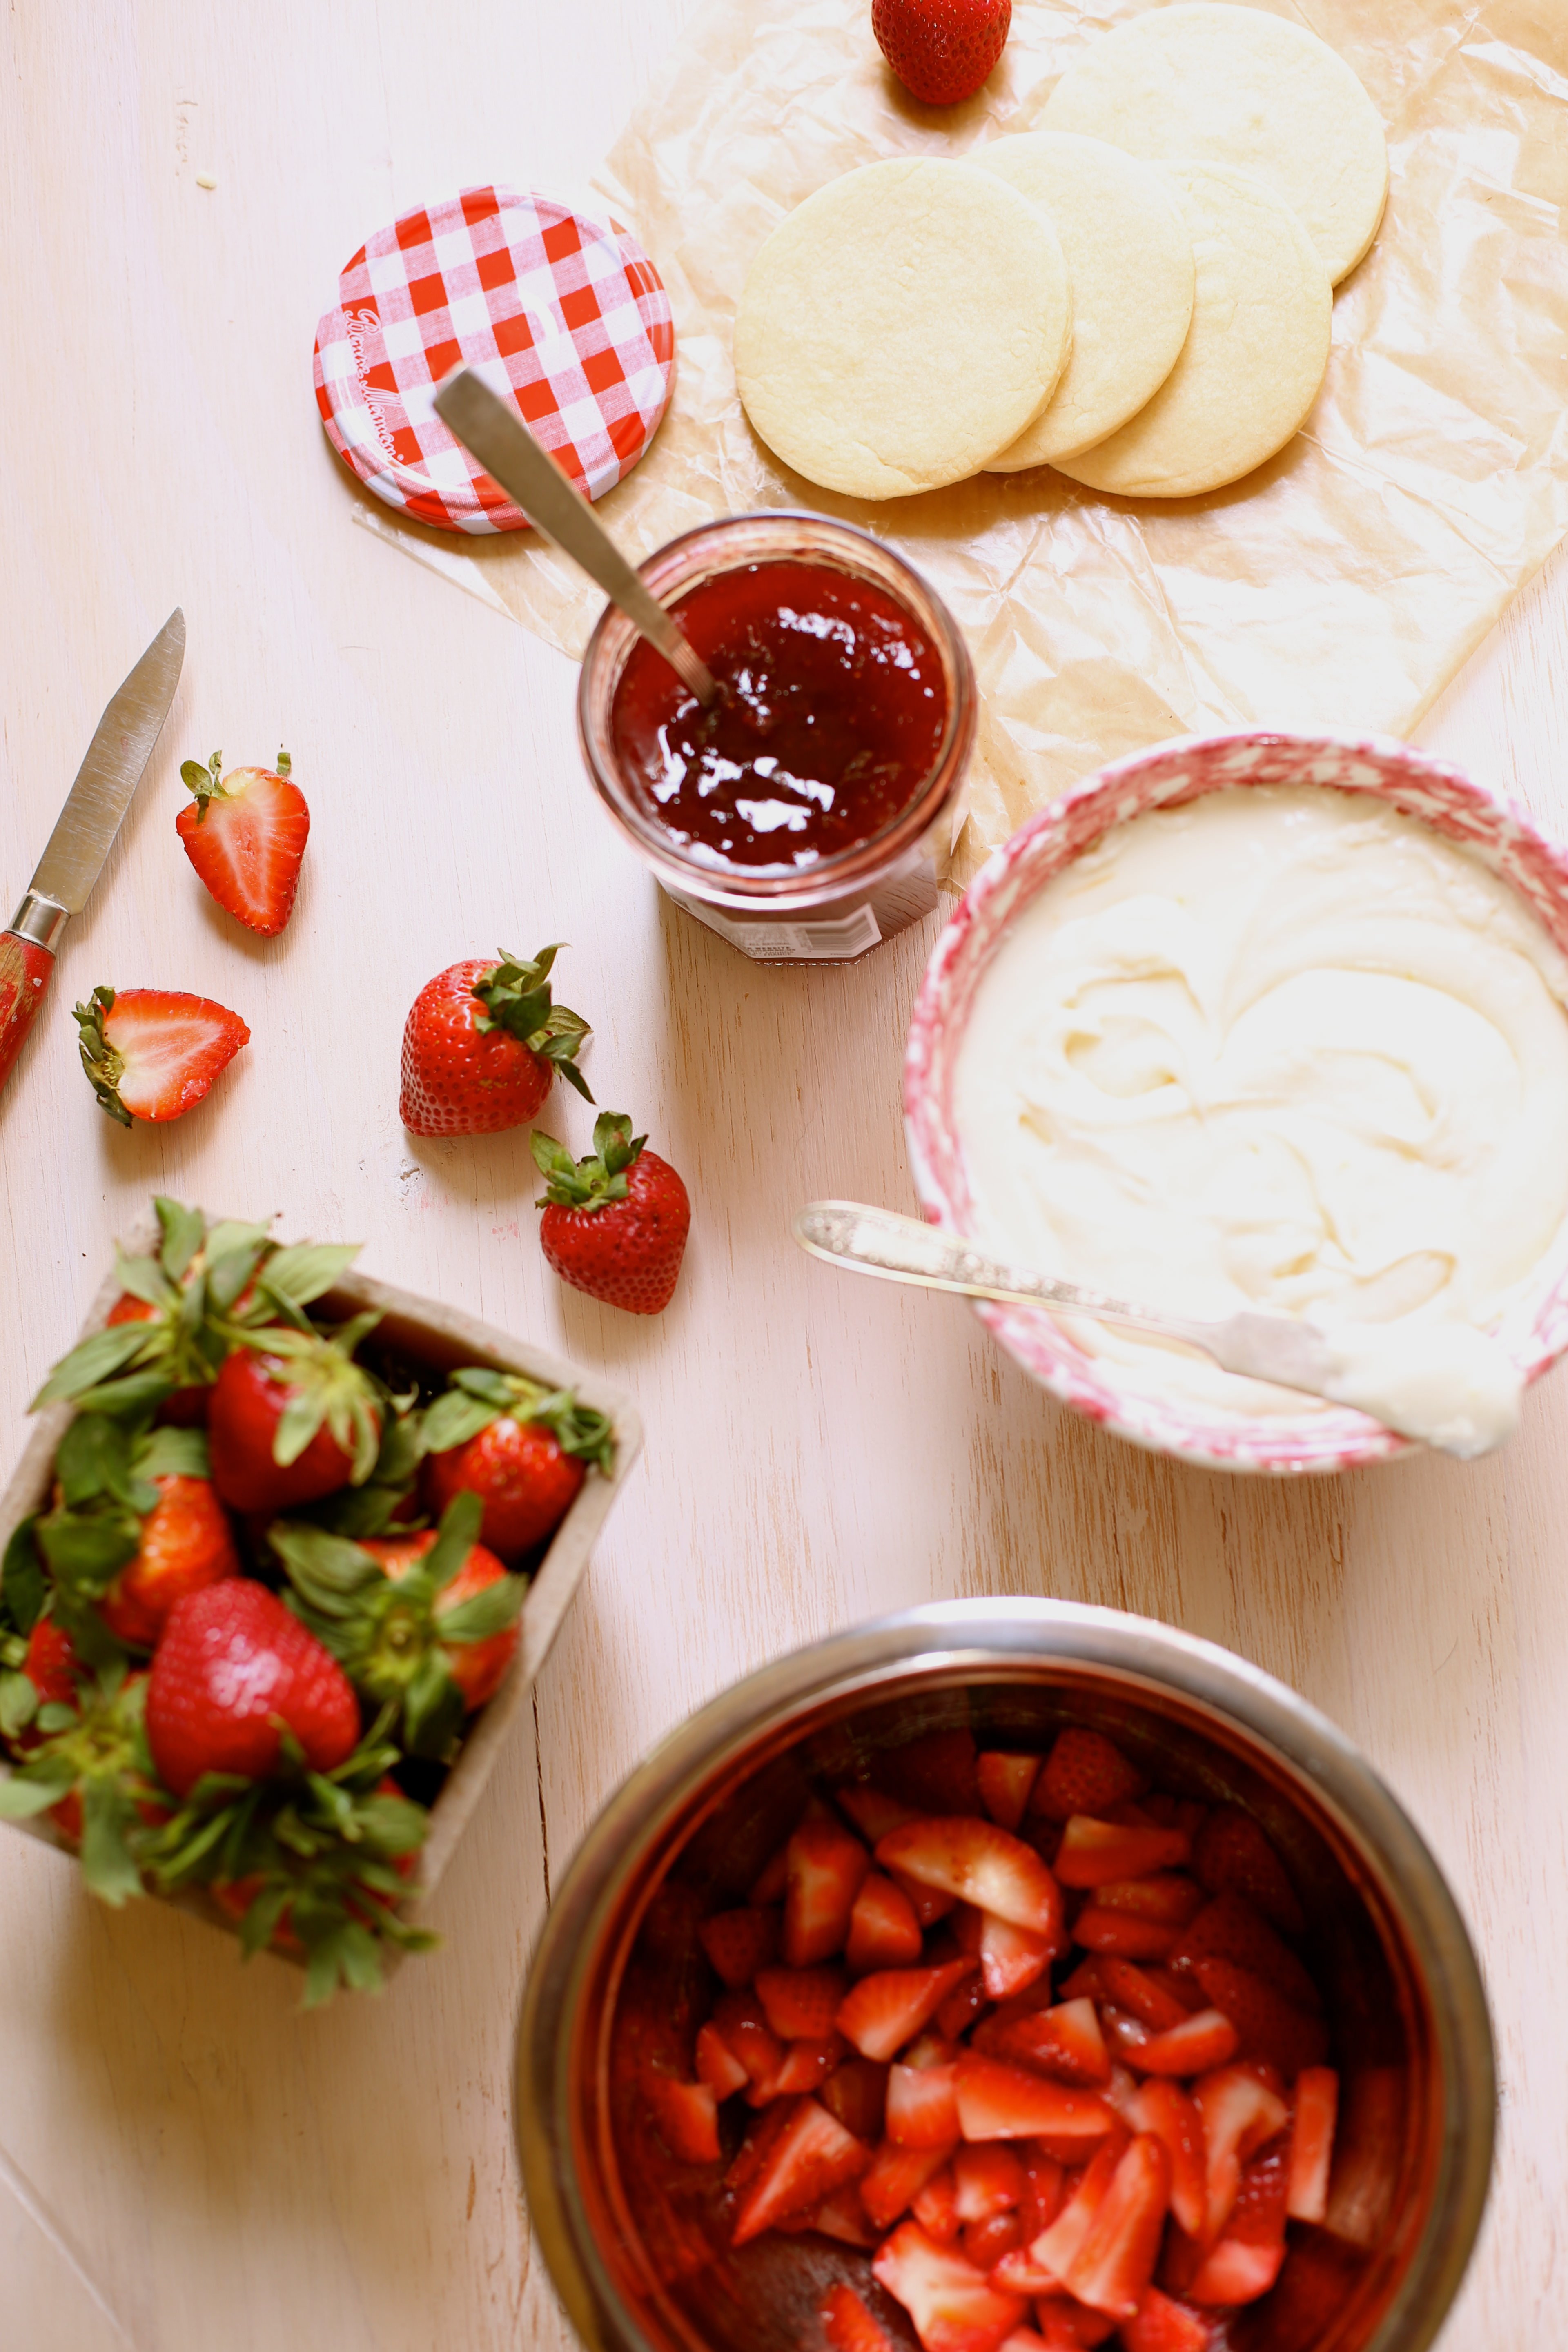 a bowl of strawberries, cream and jam on a table with a knife  